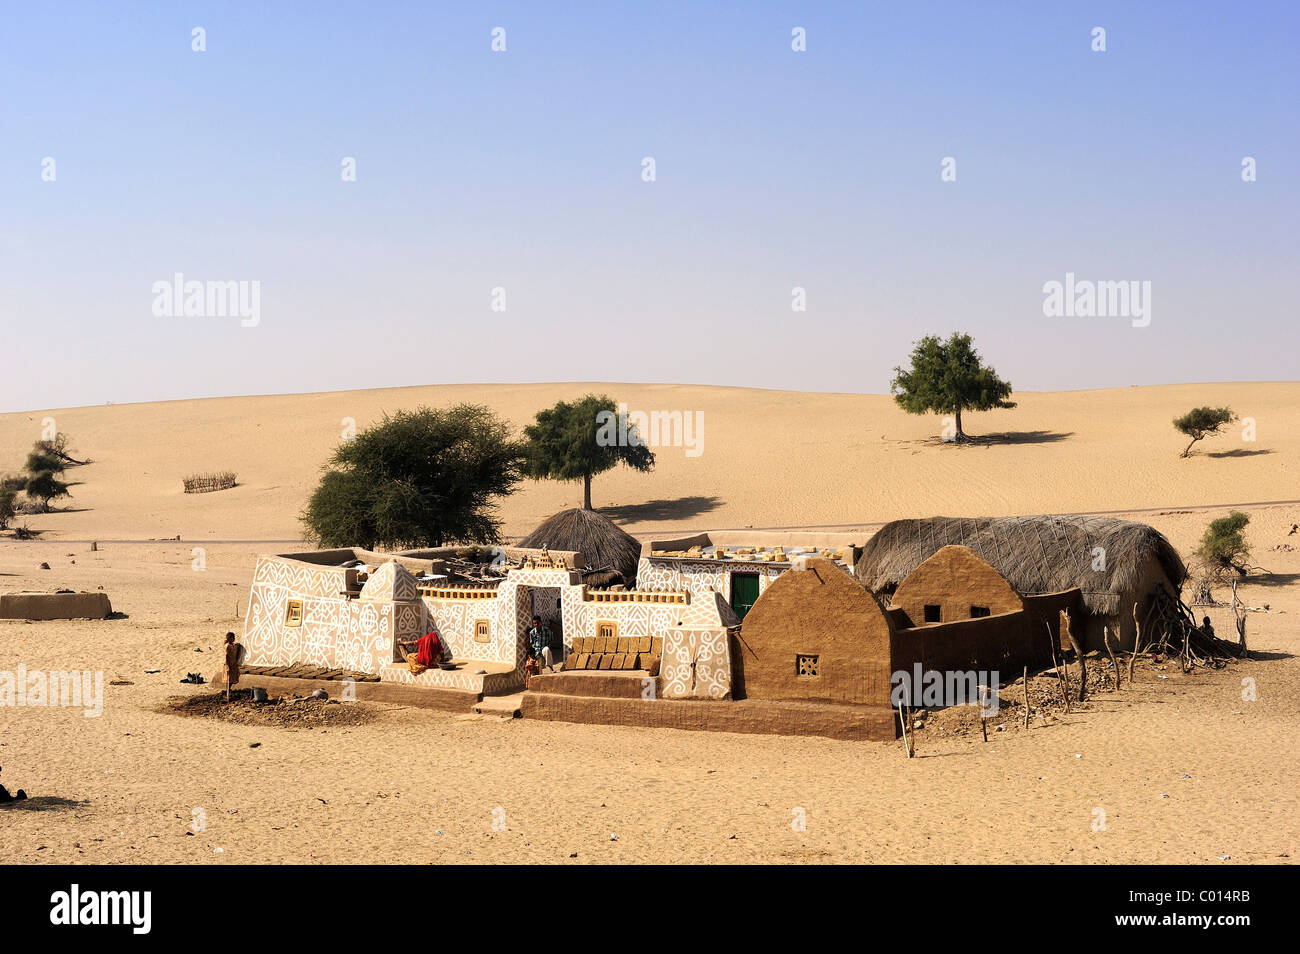 Typical traditional farmhouse with painted walls in the Thar Desert, Rajasthan, India, Asia Stock Photo